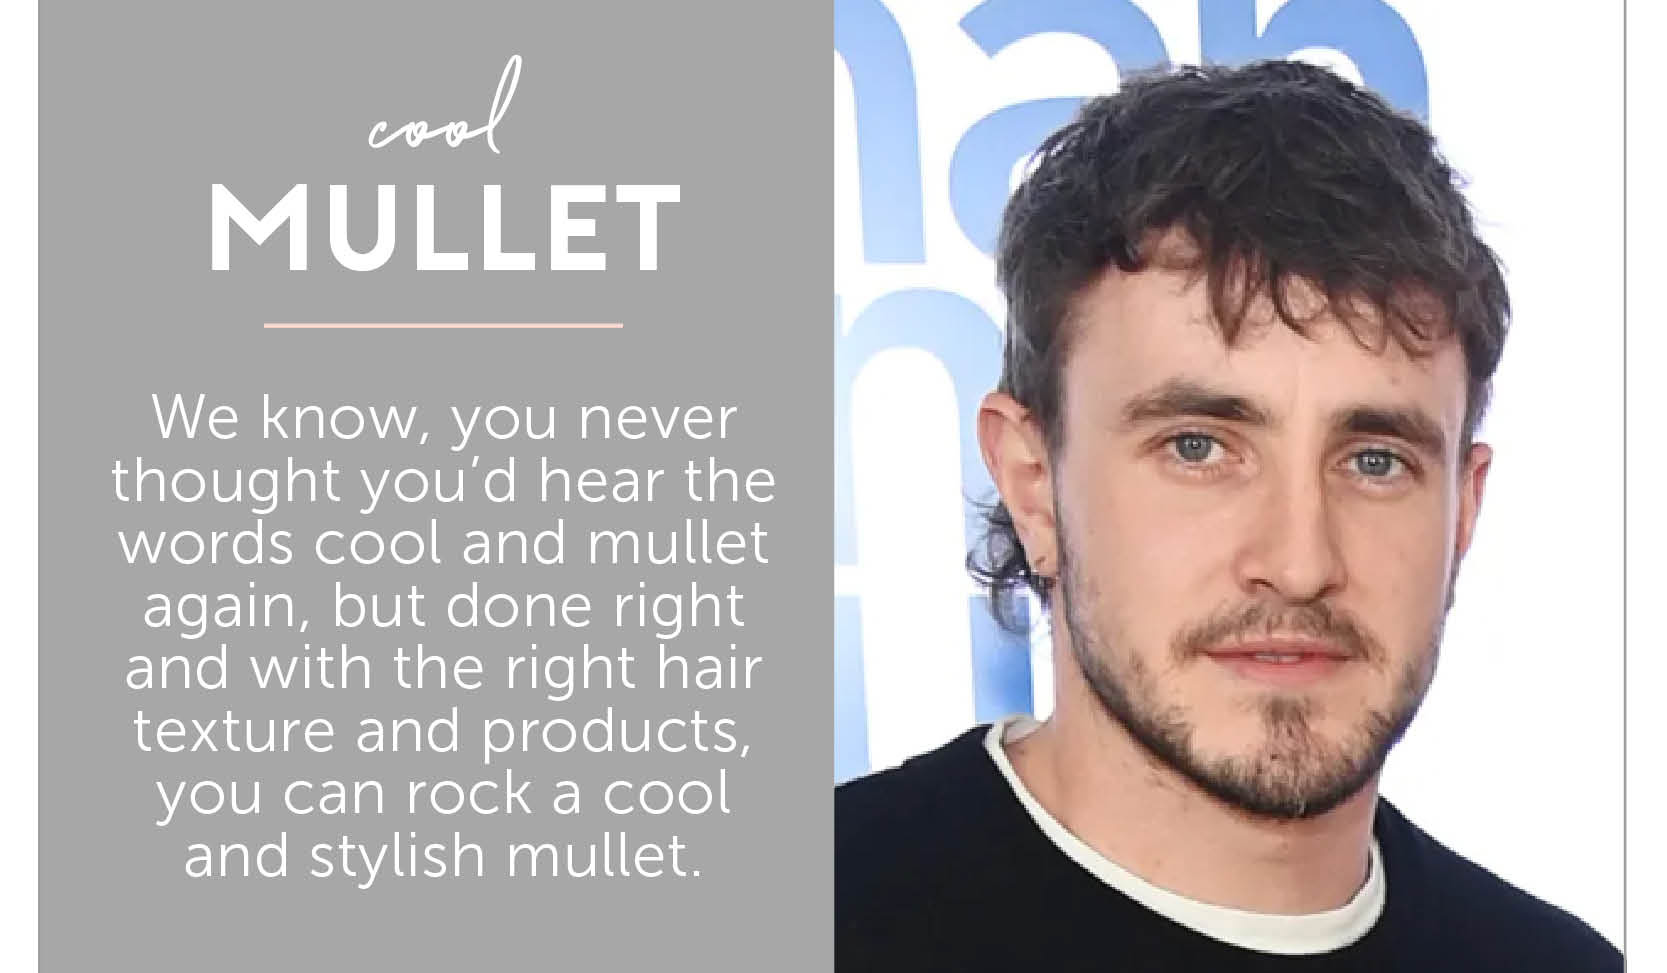 Cool Mullet- We know, you never thought you’d hear the words cool and mullet again, but done right (by your Charles Ifergan Stylist of course), and with the rest hair texture and products, you can rock a cool and stylish mullet.